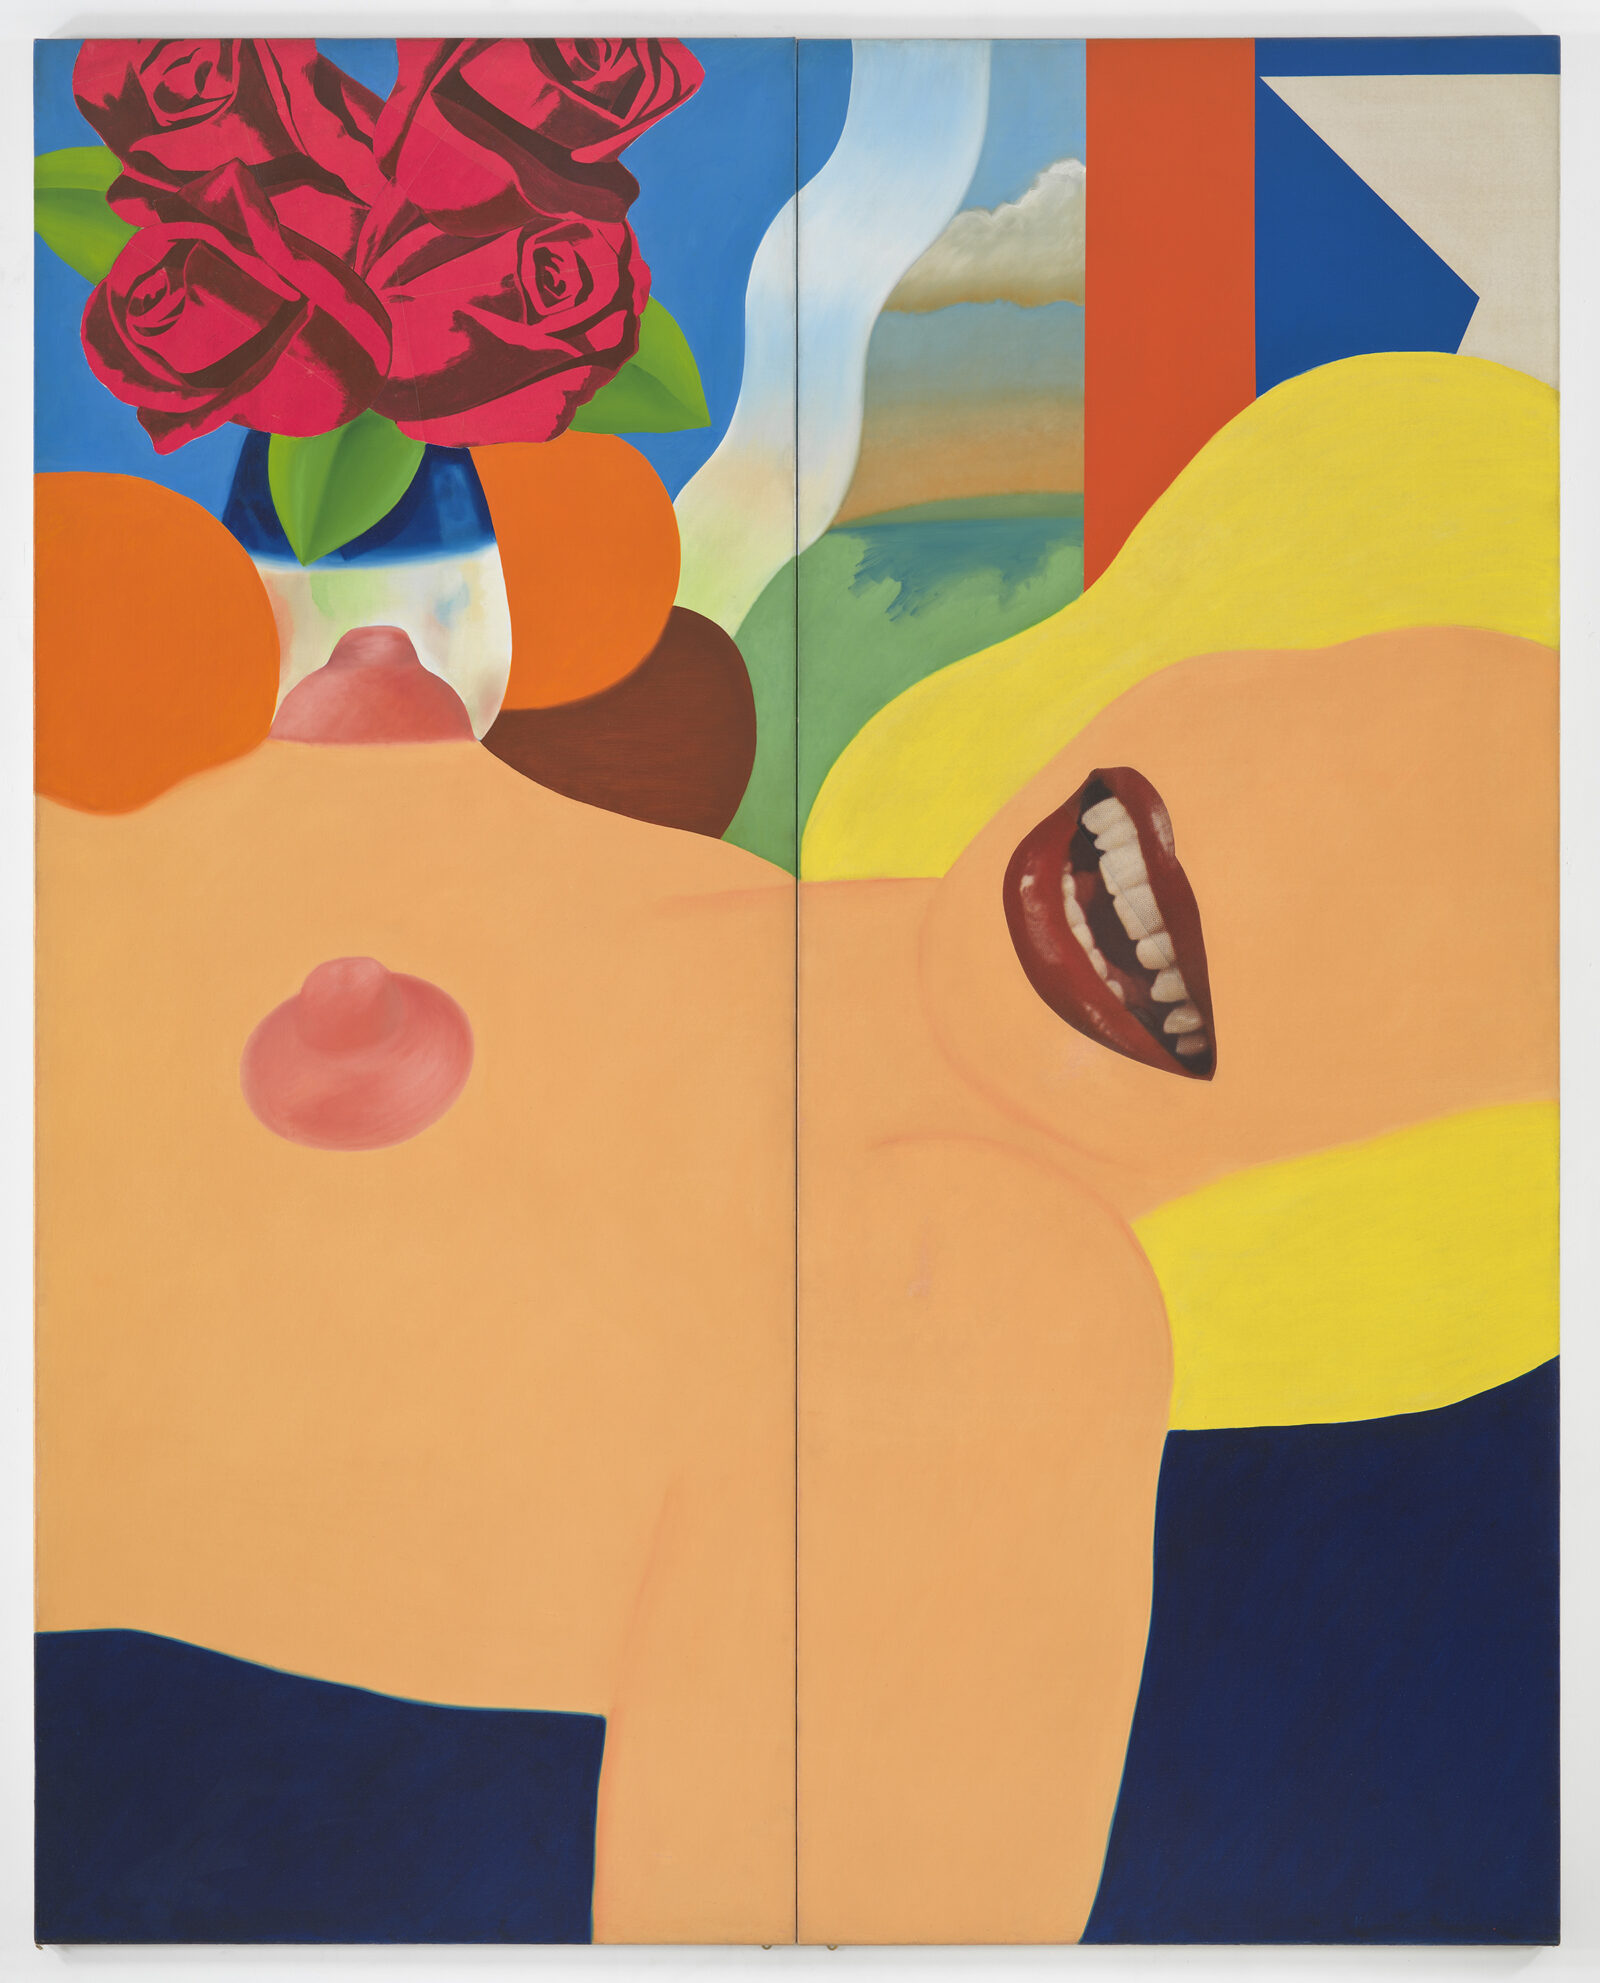 Tom Wesselmann
Great American Nude #53, 1964
Oil and printed reproductions on canvas
120 x 96 inches (304.8 x 243.8 cm)
© The Estate of Tom Wesselmann/Licensed by ARS/VAGA, New York
Photo: Jeffrey Sturges
Courtesy the Estate and Gagosian